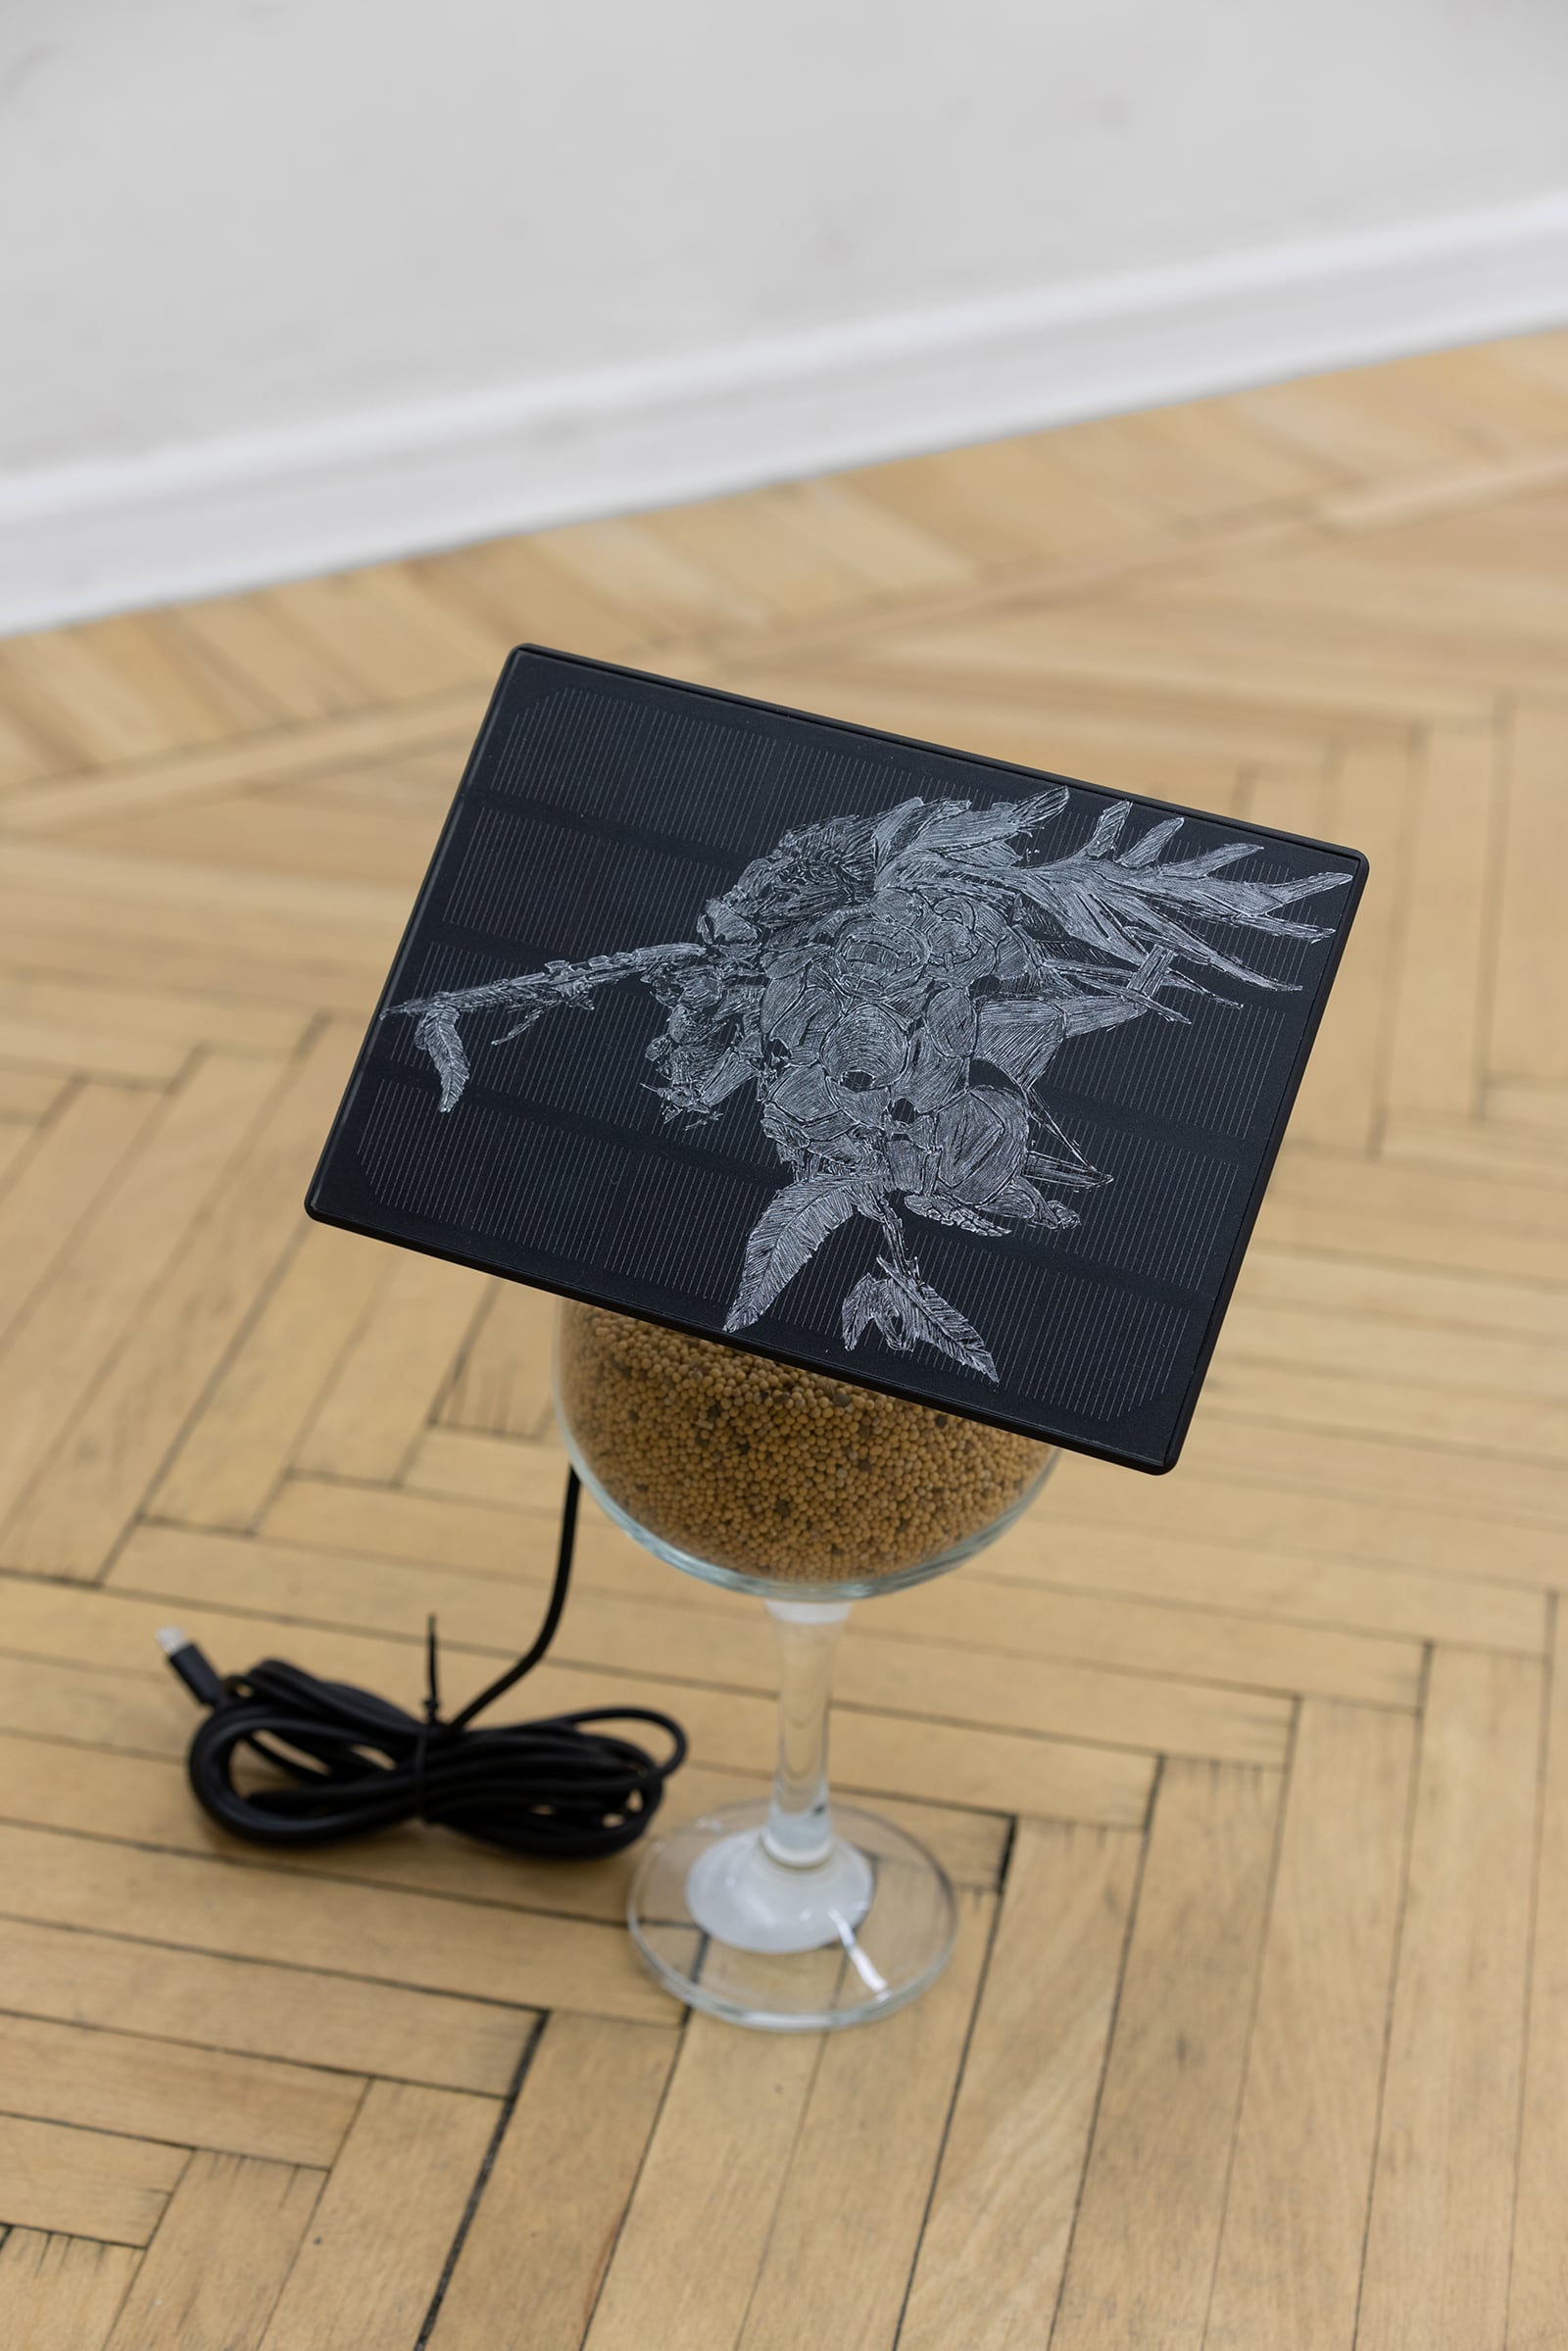 Ben Sang, Aeromorph 1, 2022, etching on solar panel, battery, wine glass, mustard seeds, dimensions vary